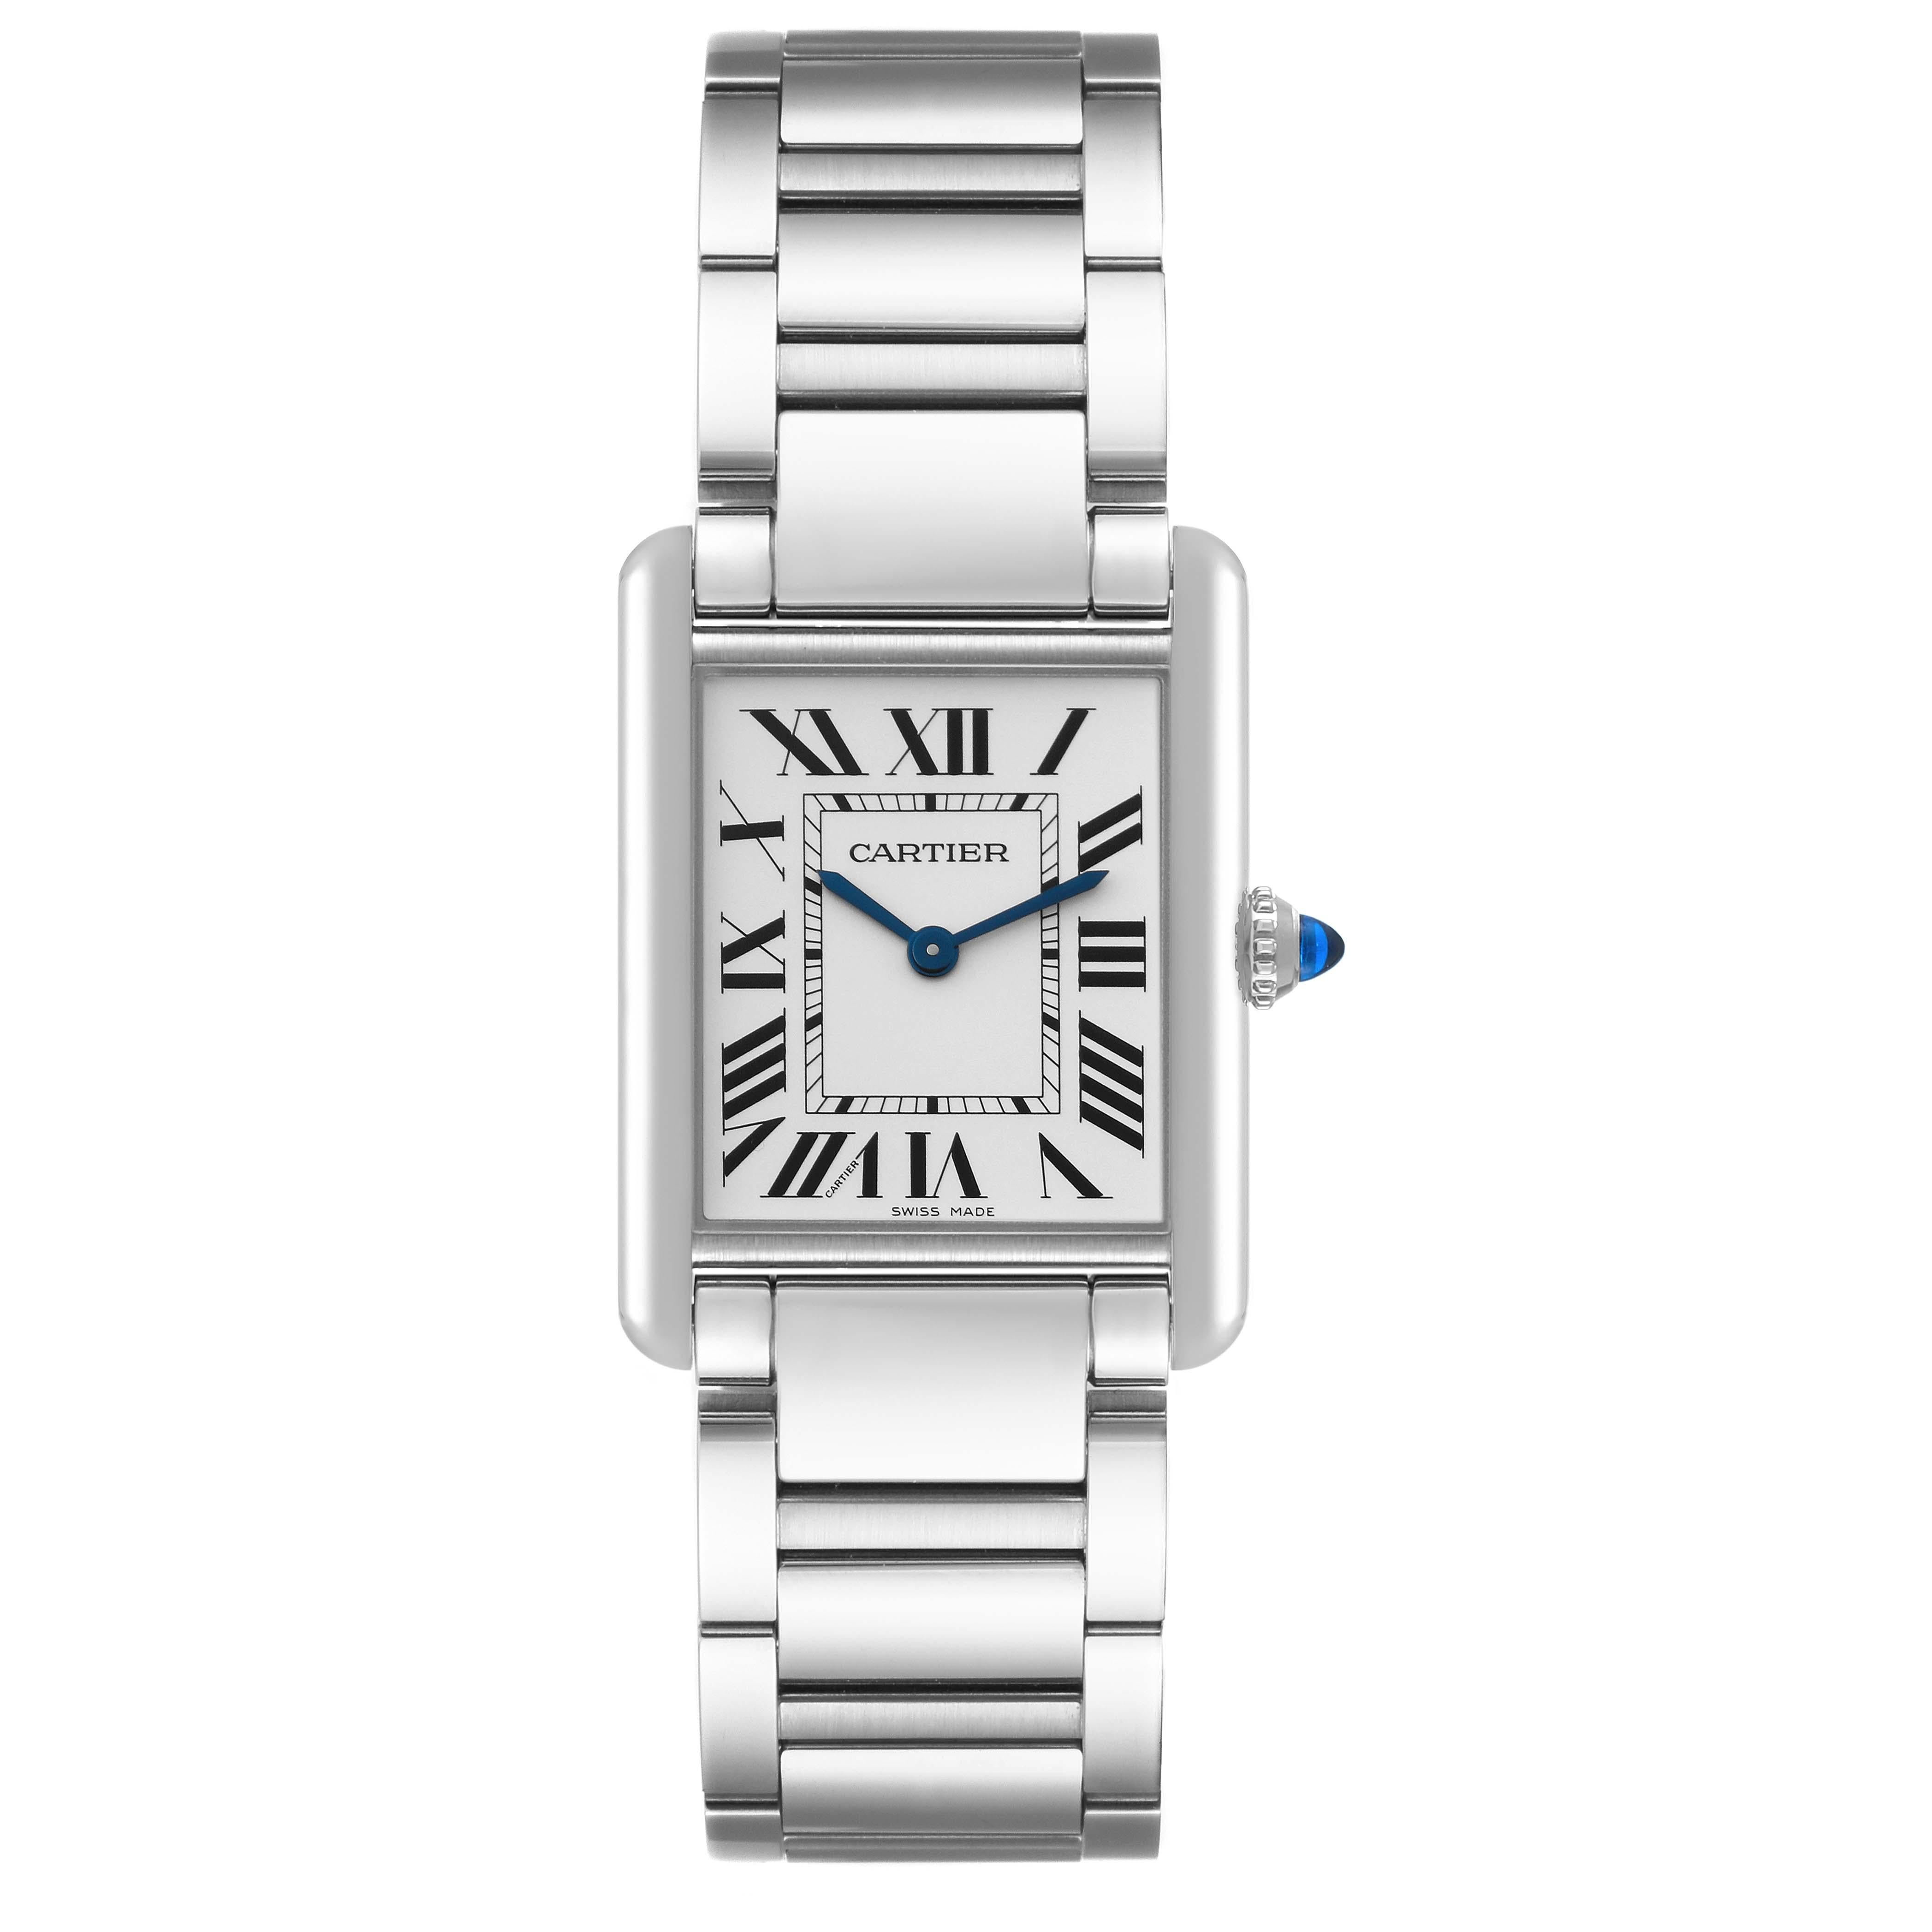 Cartier Tank Must Large Steel Silver Dial Ladies Watch WSTA0052 Unworn. Quartz movement. Stainless steel case 33.7 x 25.5 mm. Circular grained crown set with the blue spinel cabochon. . Scratch resistant sapphire crystal. Silvered dial with sword